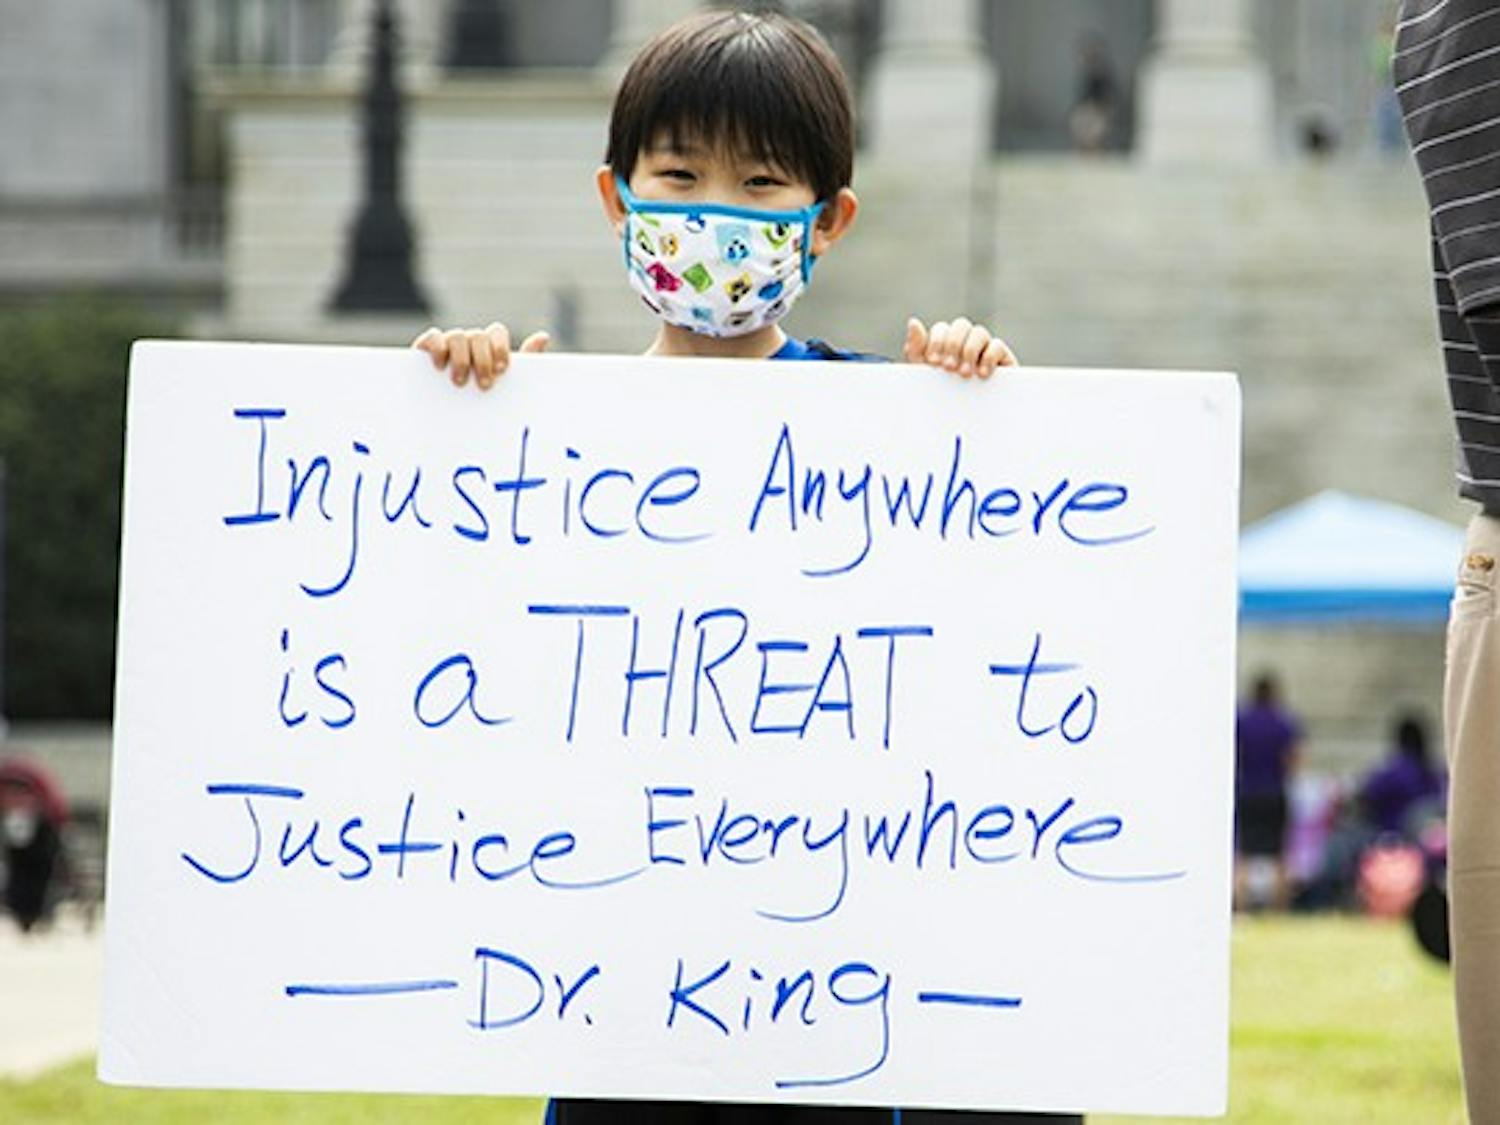 A young child holds a sign that says “Injustice Anywhere is a THREAT to JusticeEverywhere -Dr. King” during a protest about stopping Asian hate in America.
